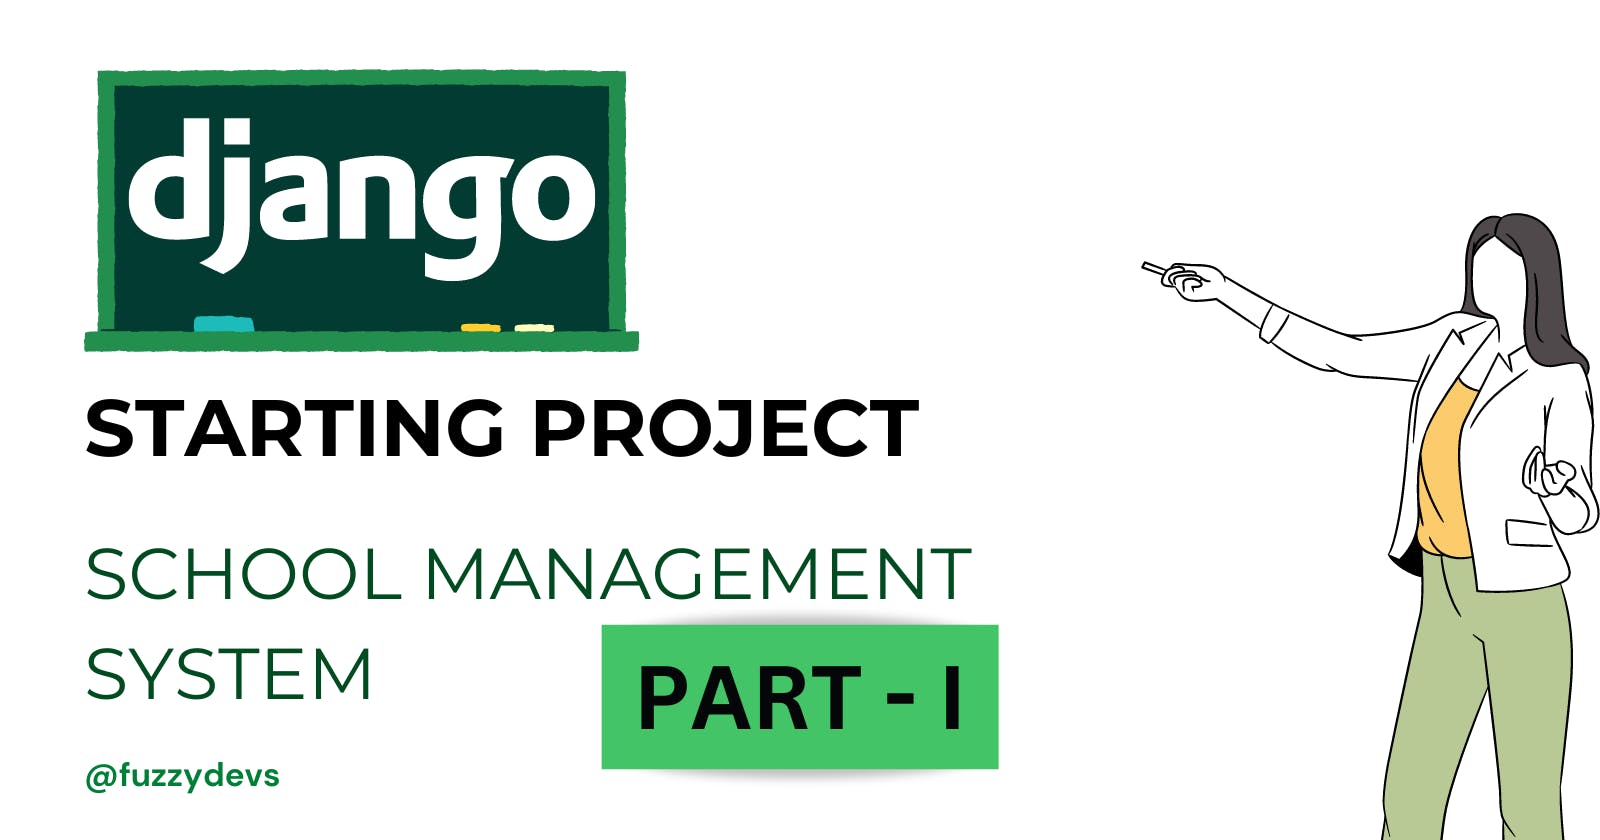 Building a School Management System with Django